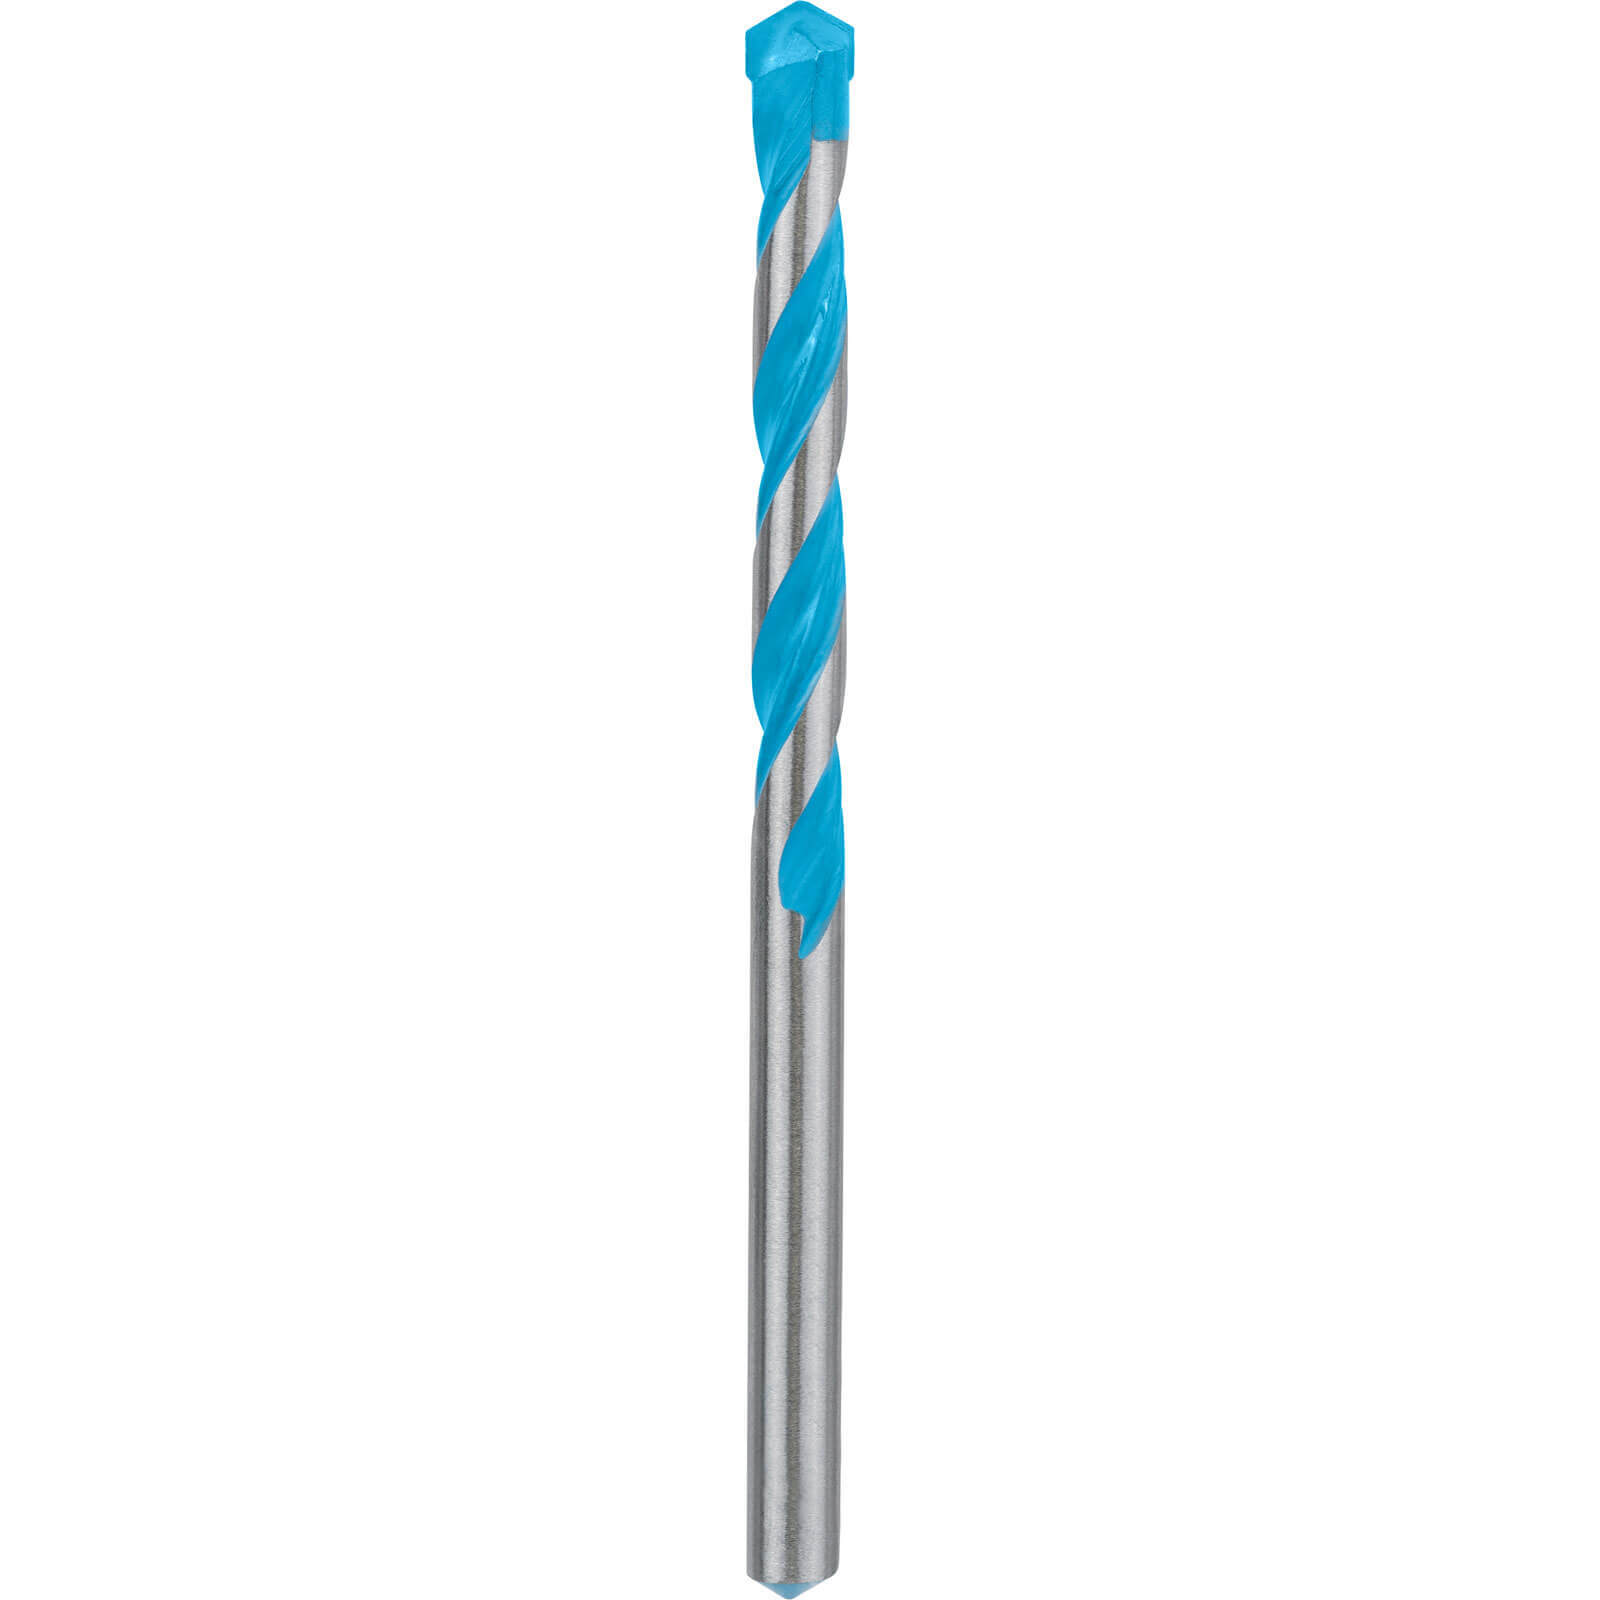 Photo of Bosch Expert Cyl-9 Multi Construction Drill Bit 8mm 120mm Pack Of 10